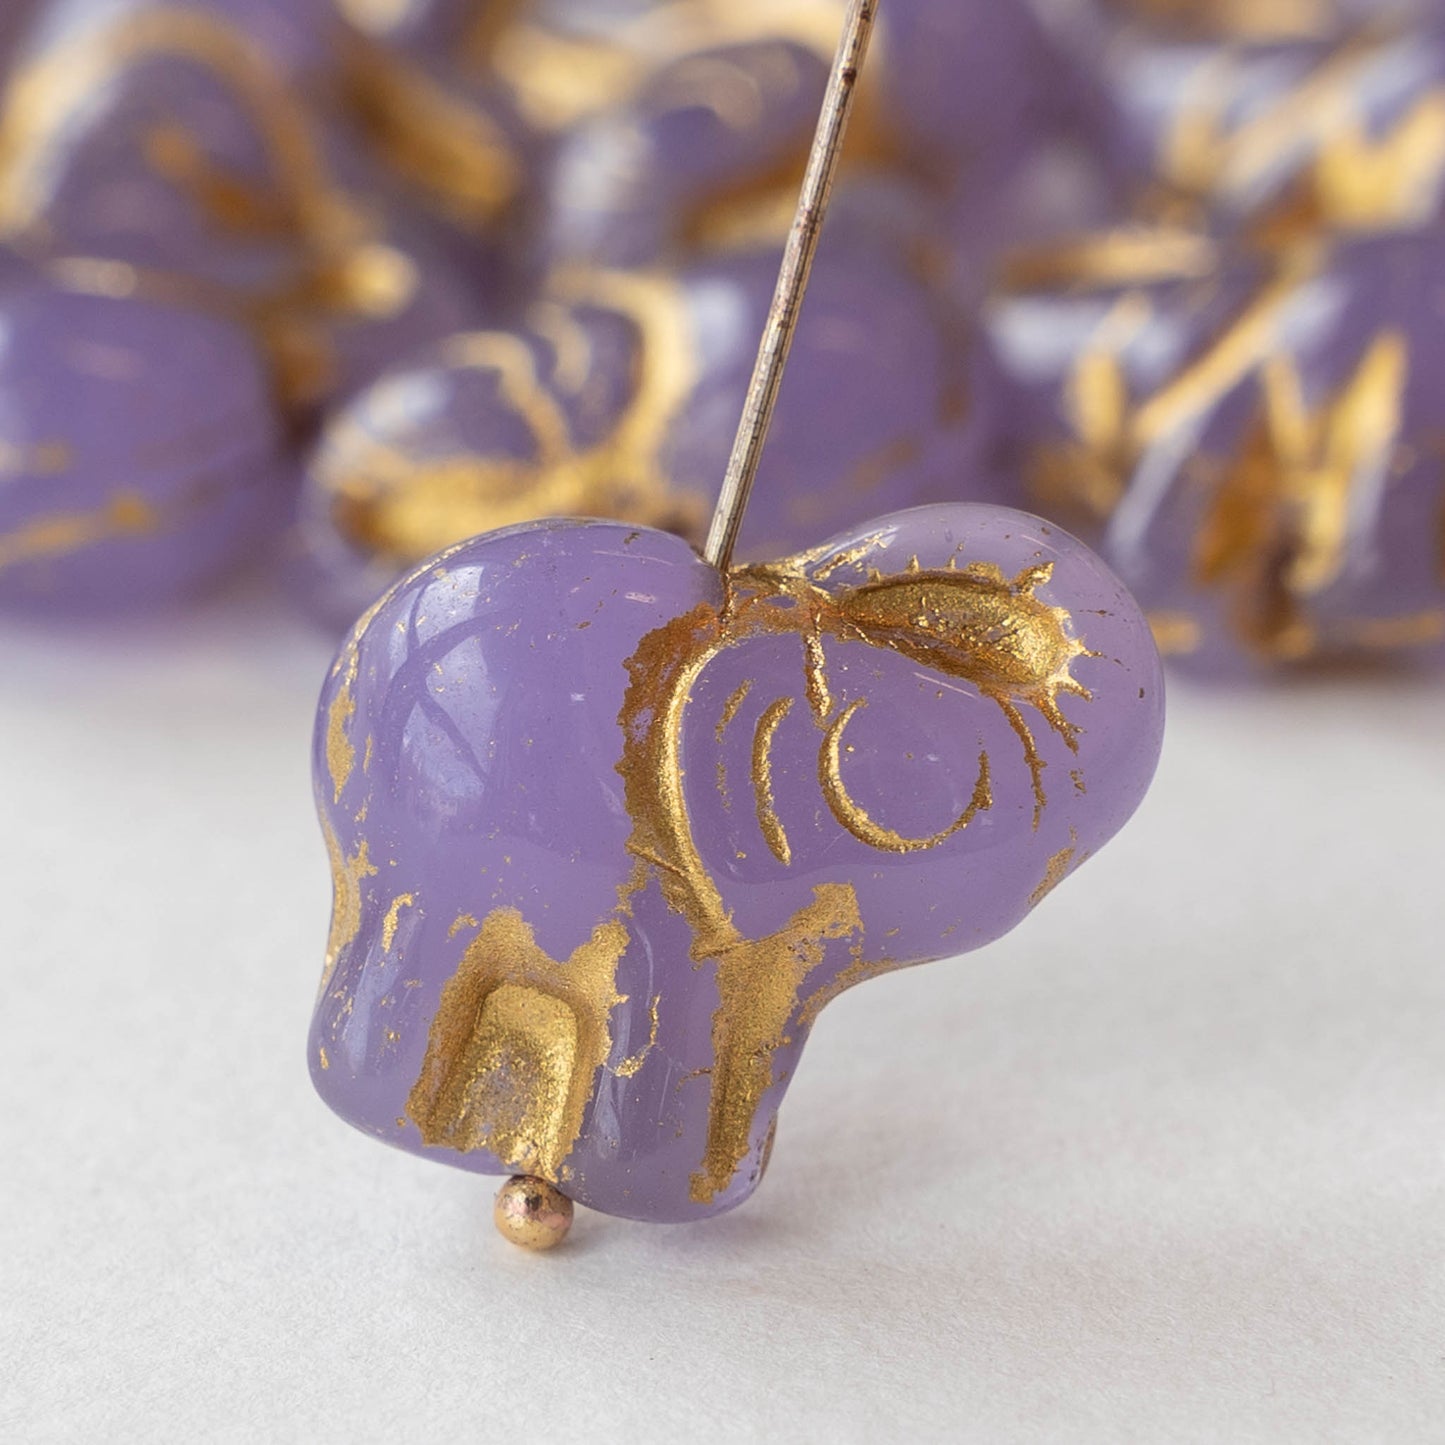 20x21mm Glass Elephant Beads - Lavender with Gold Decor